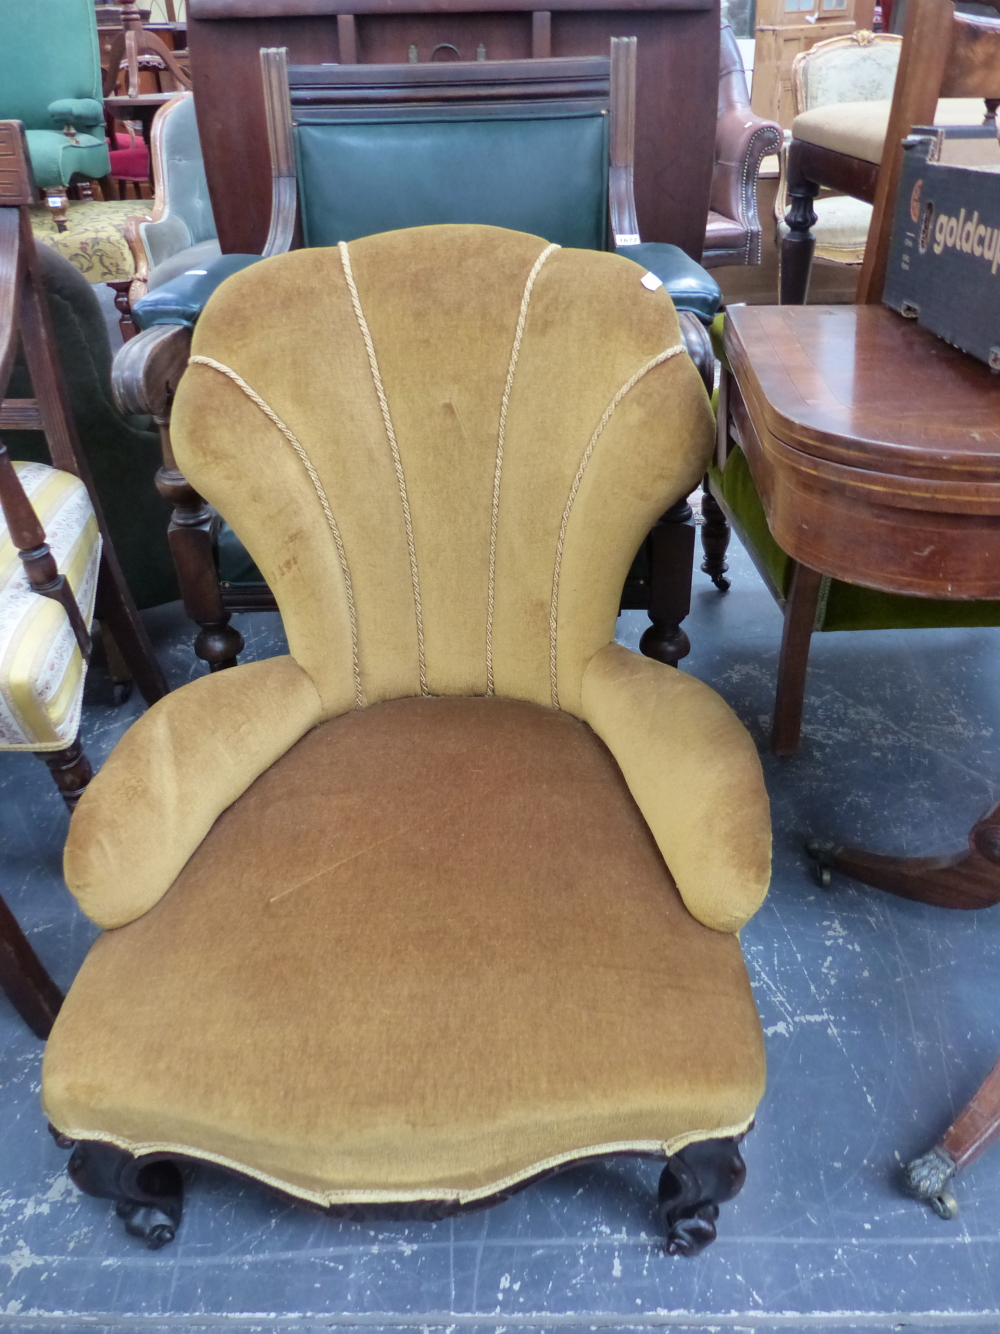 A VICTORIAN SHELL BACKED NURSING CHAIR UPHOLSTERED IN GOLDEN VELVET TOGETHER WITH A GREEN LEATHER